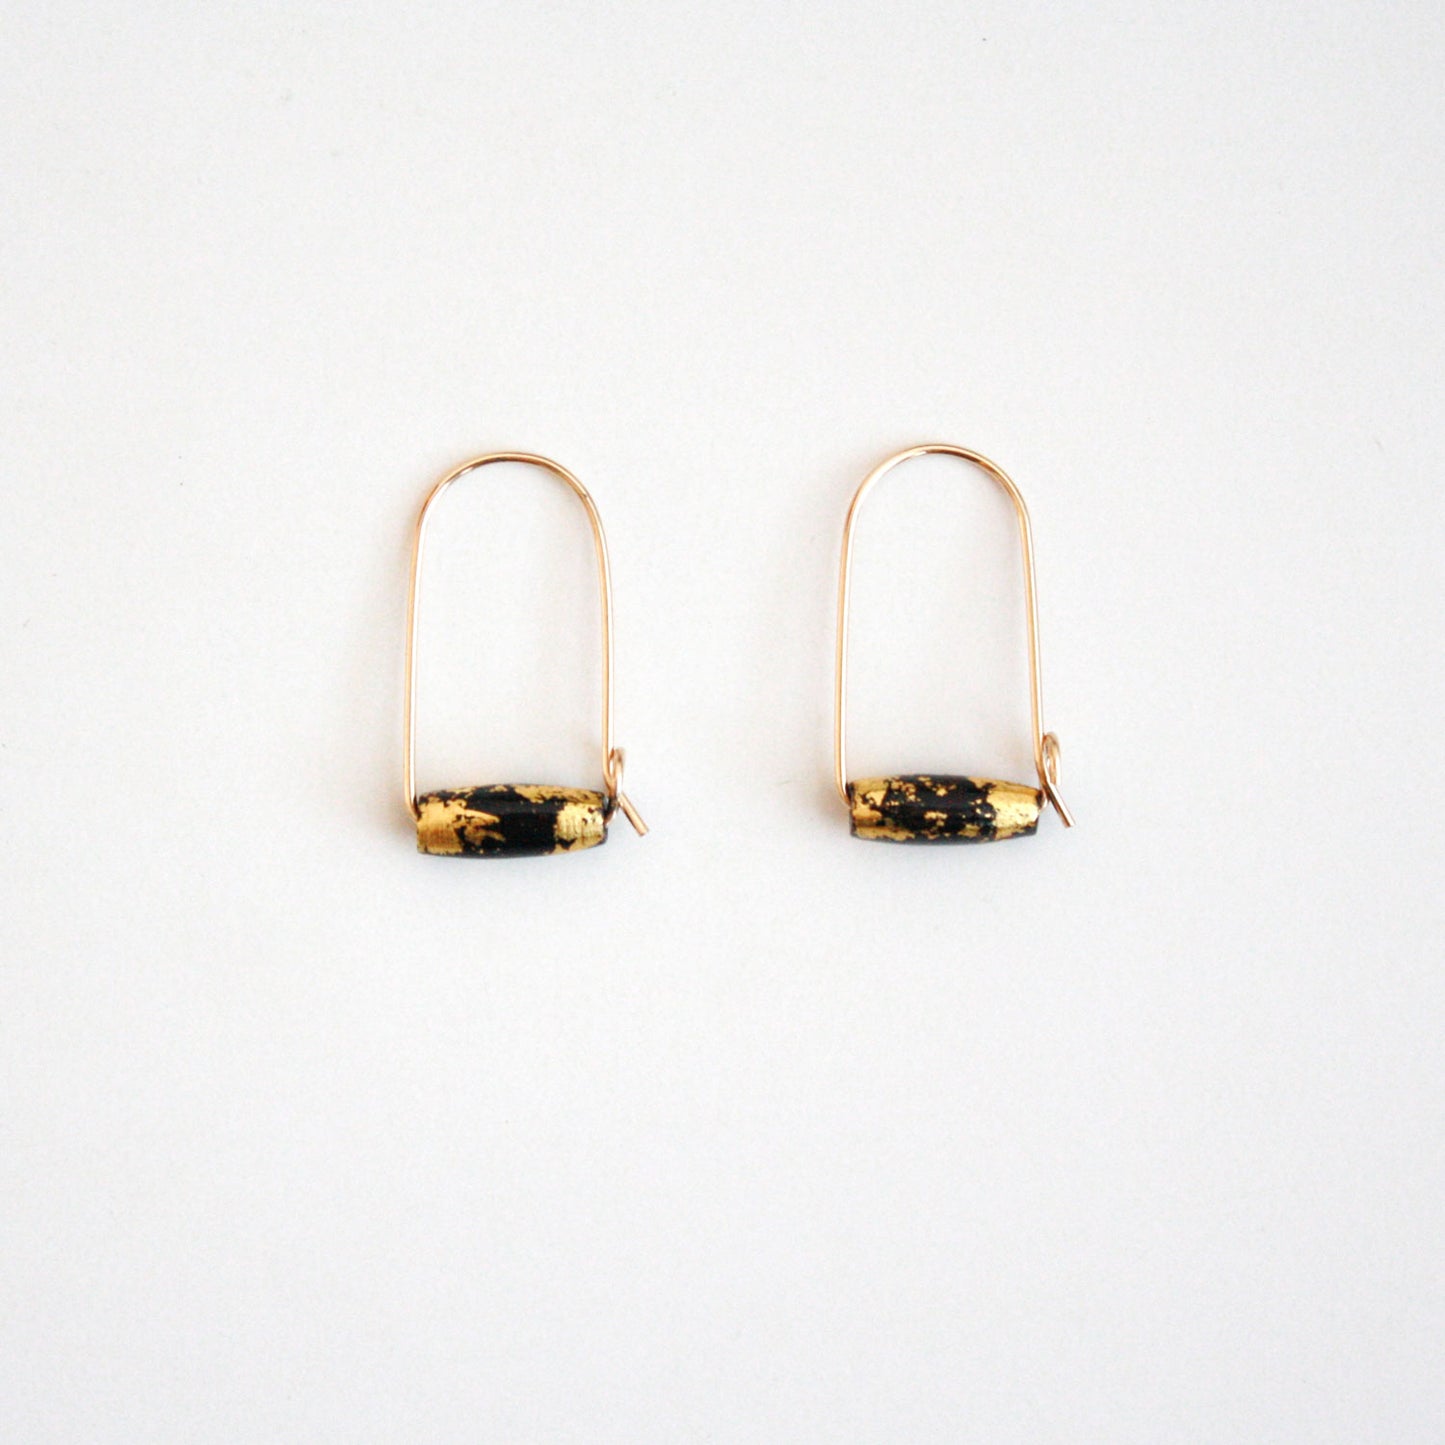 Small Mountain Hoop Earrings - Tubes with Gold Leaf